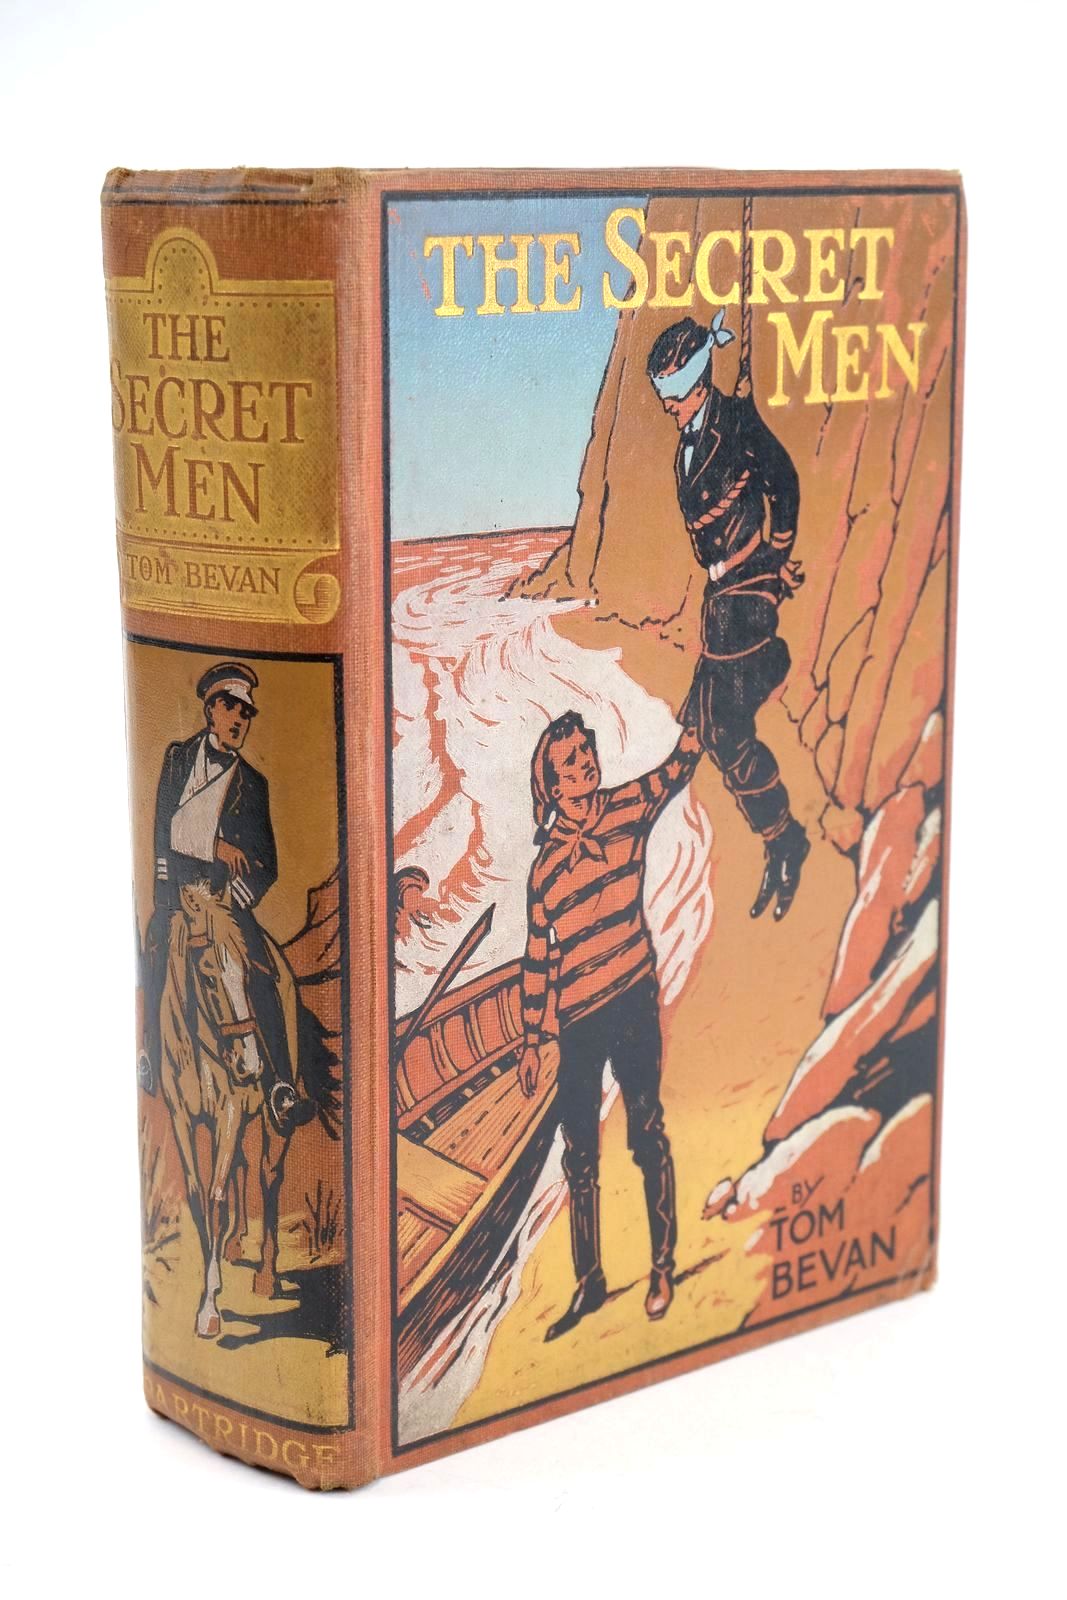 Photo of THE SECRET MEN written by Bevan, Tom illustrated by Prater, Ernest published by S.W. Partridge & Co. Ltd. (STOCK CODE: 1324660)  for sale by Stella & Rose's Books